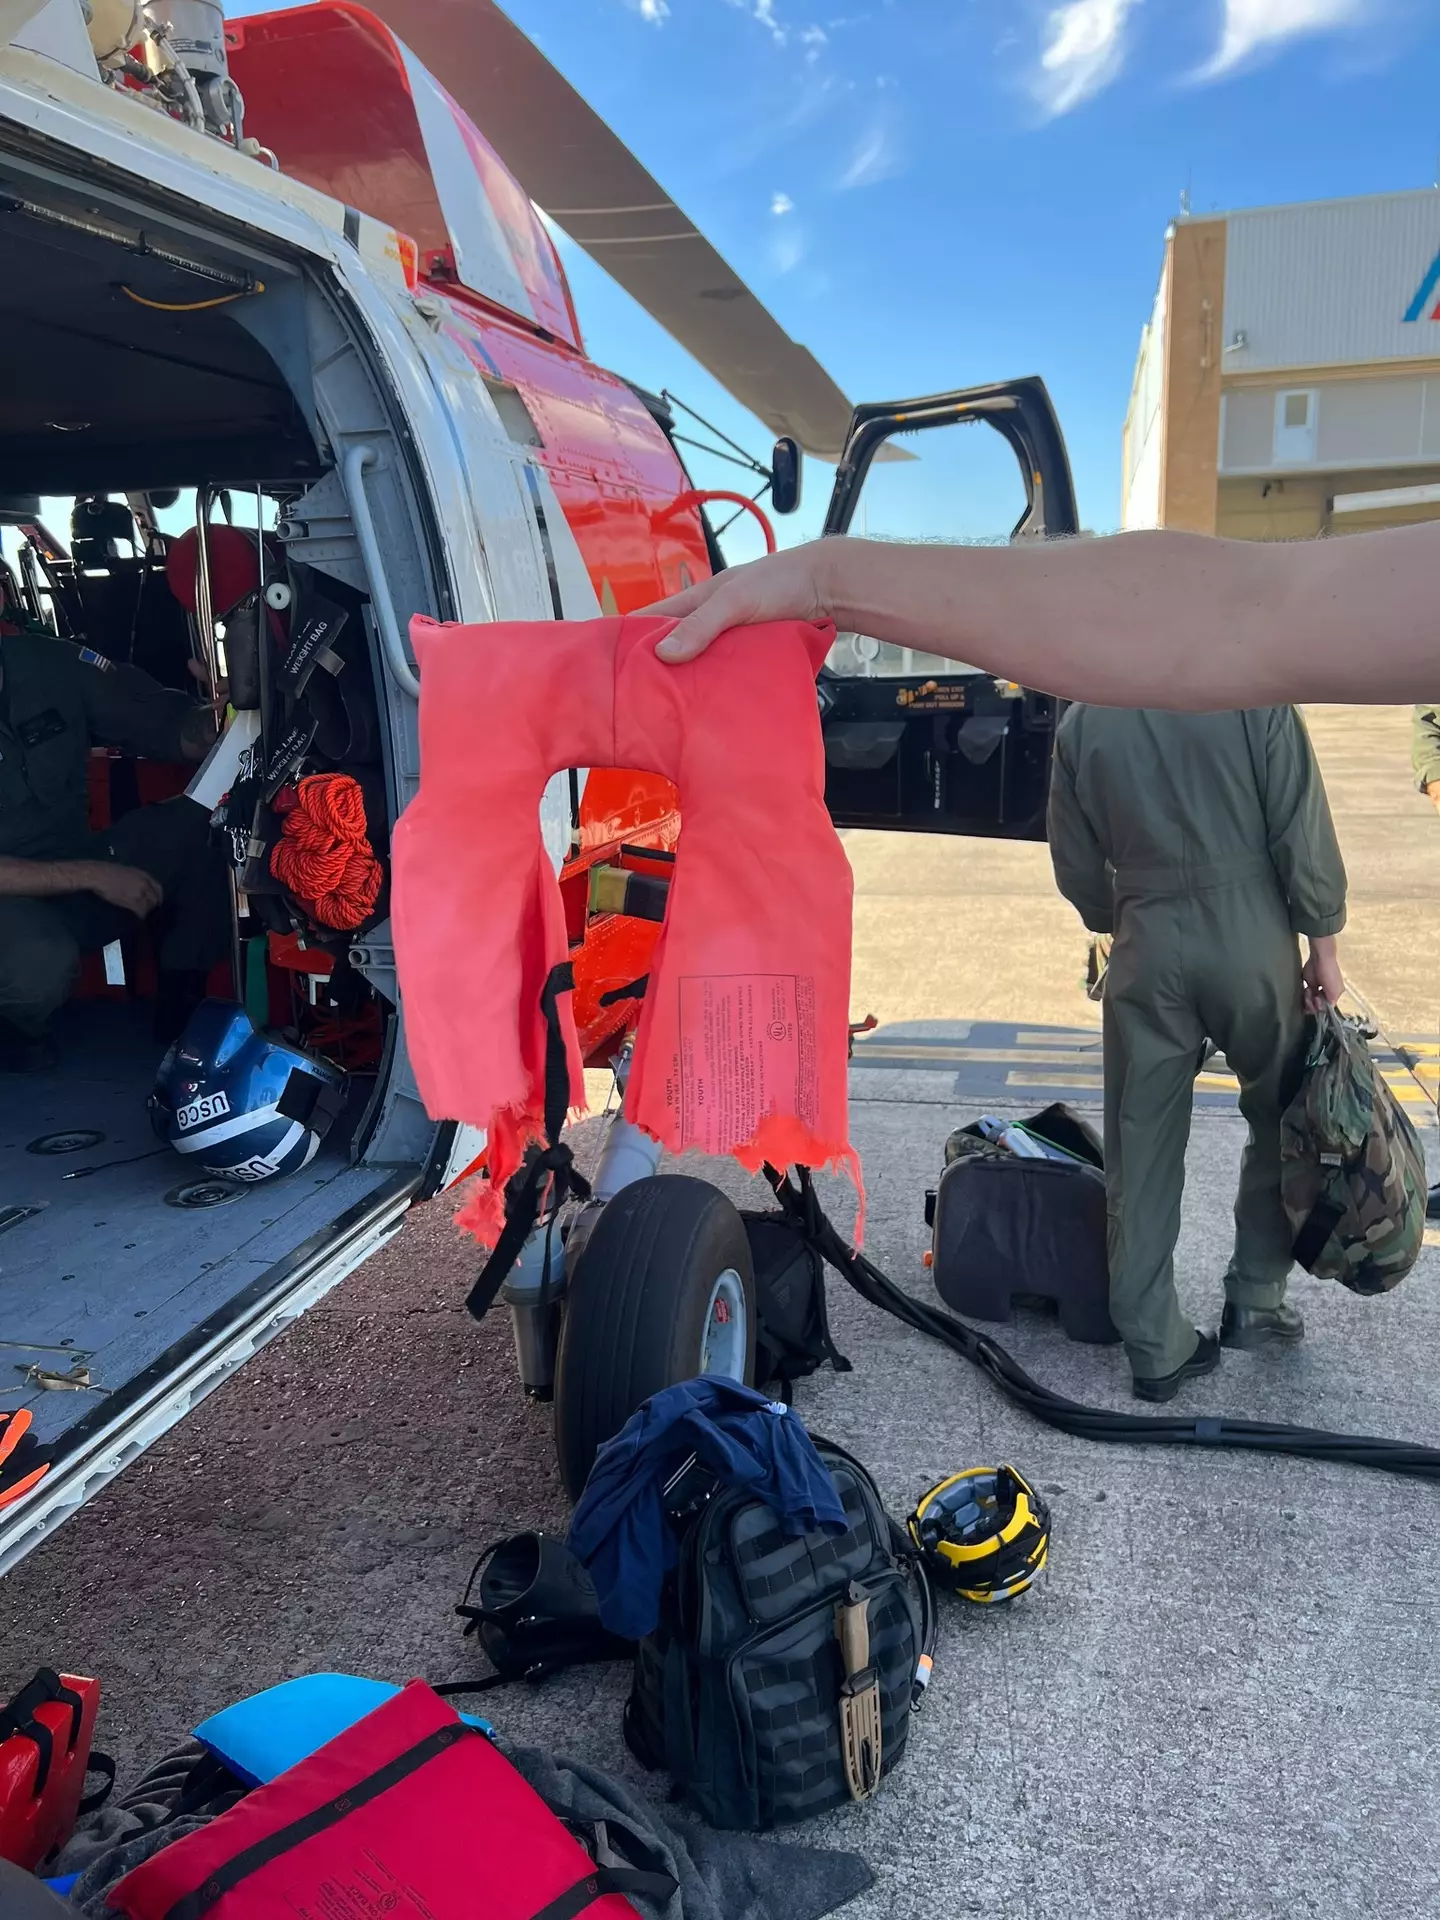 One of the life jackets was torn due to a shark attack.